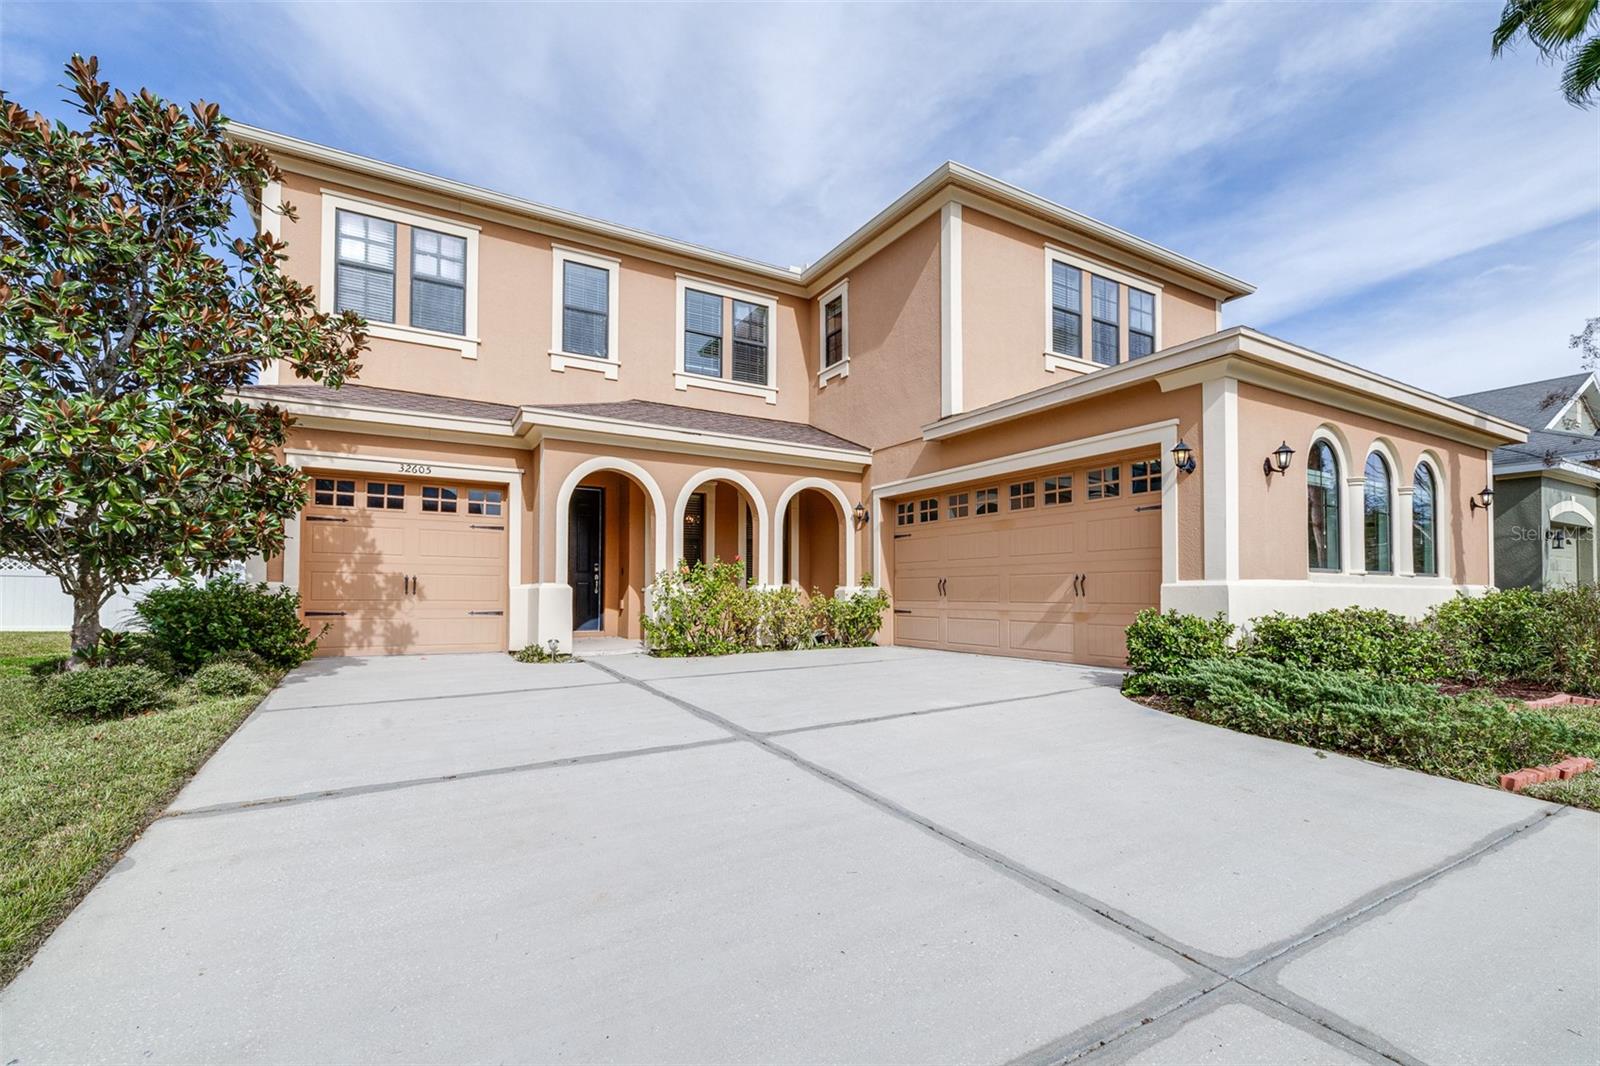 Gorgeous, luxurious home in the Peregrina neighborhood of Watergrass